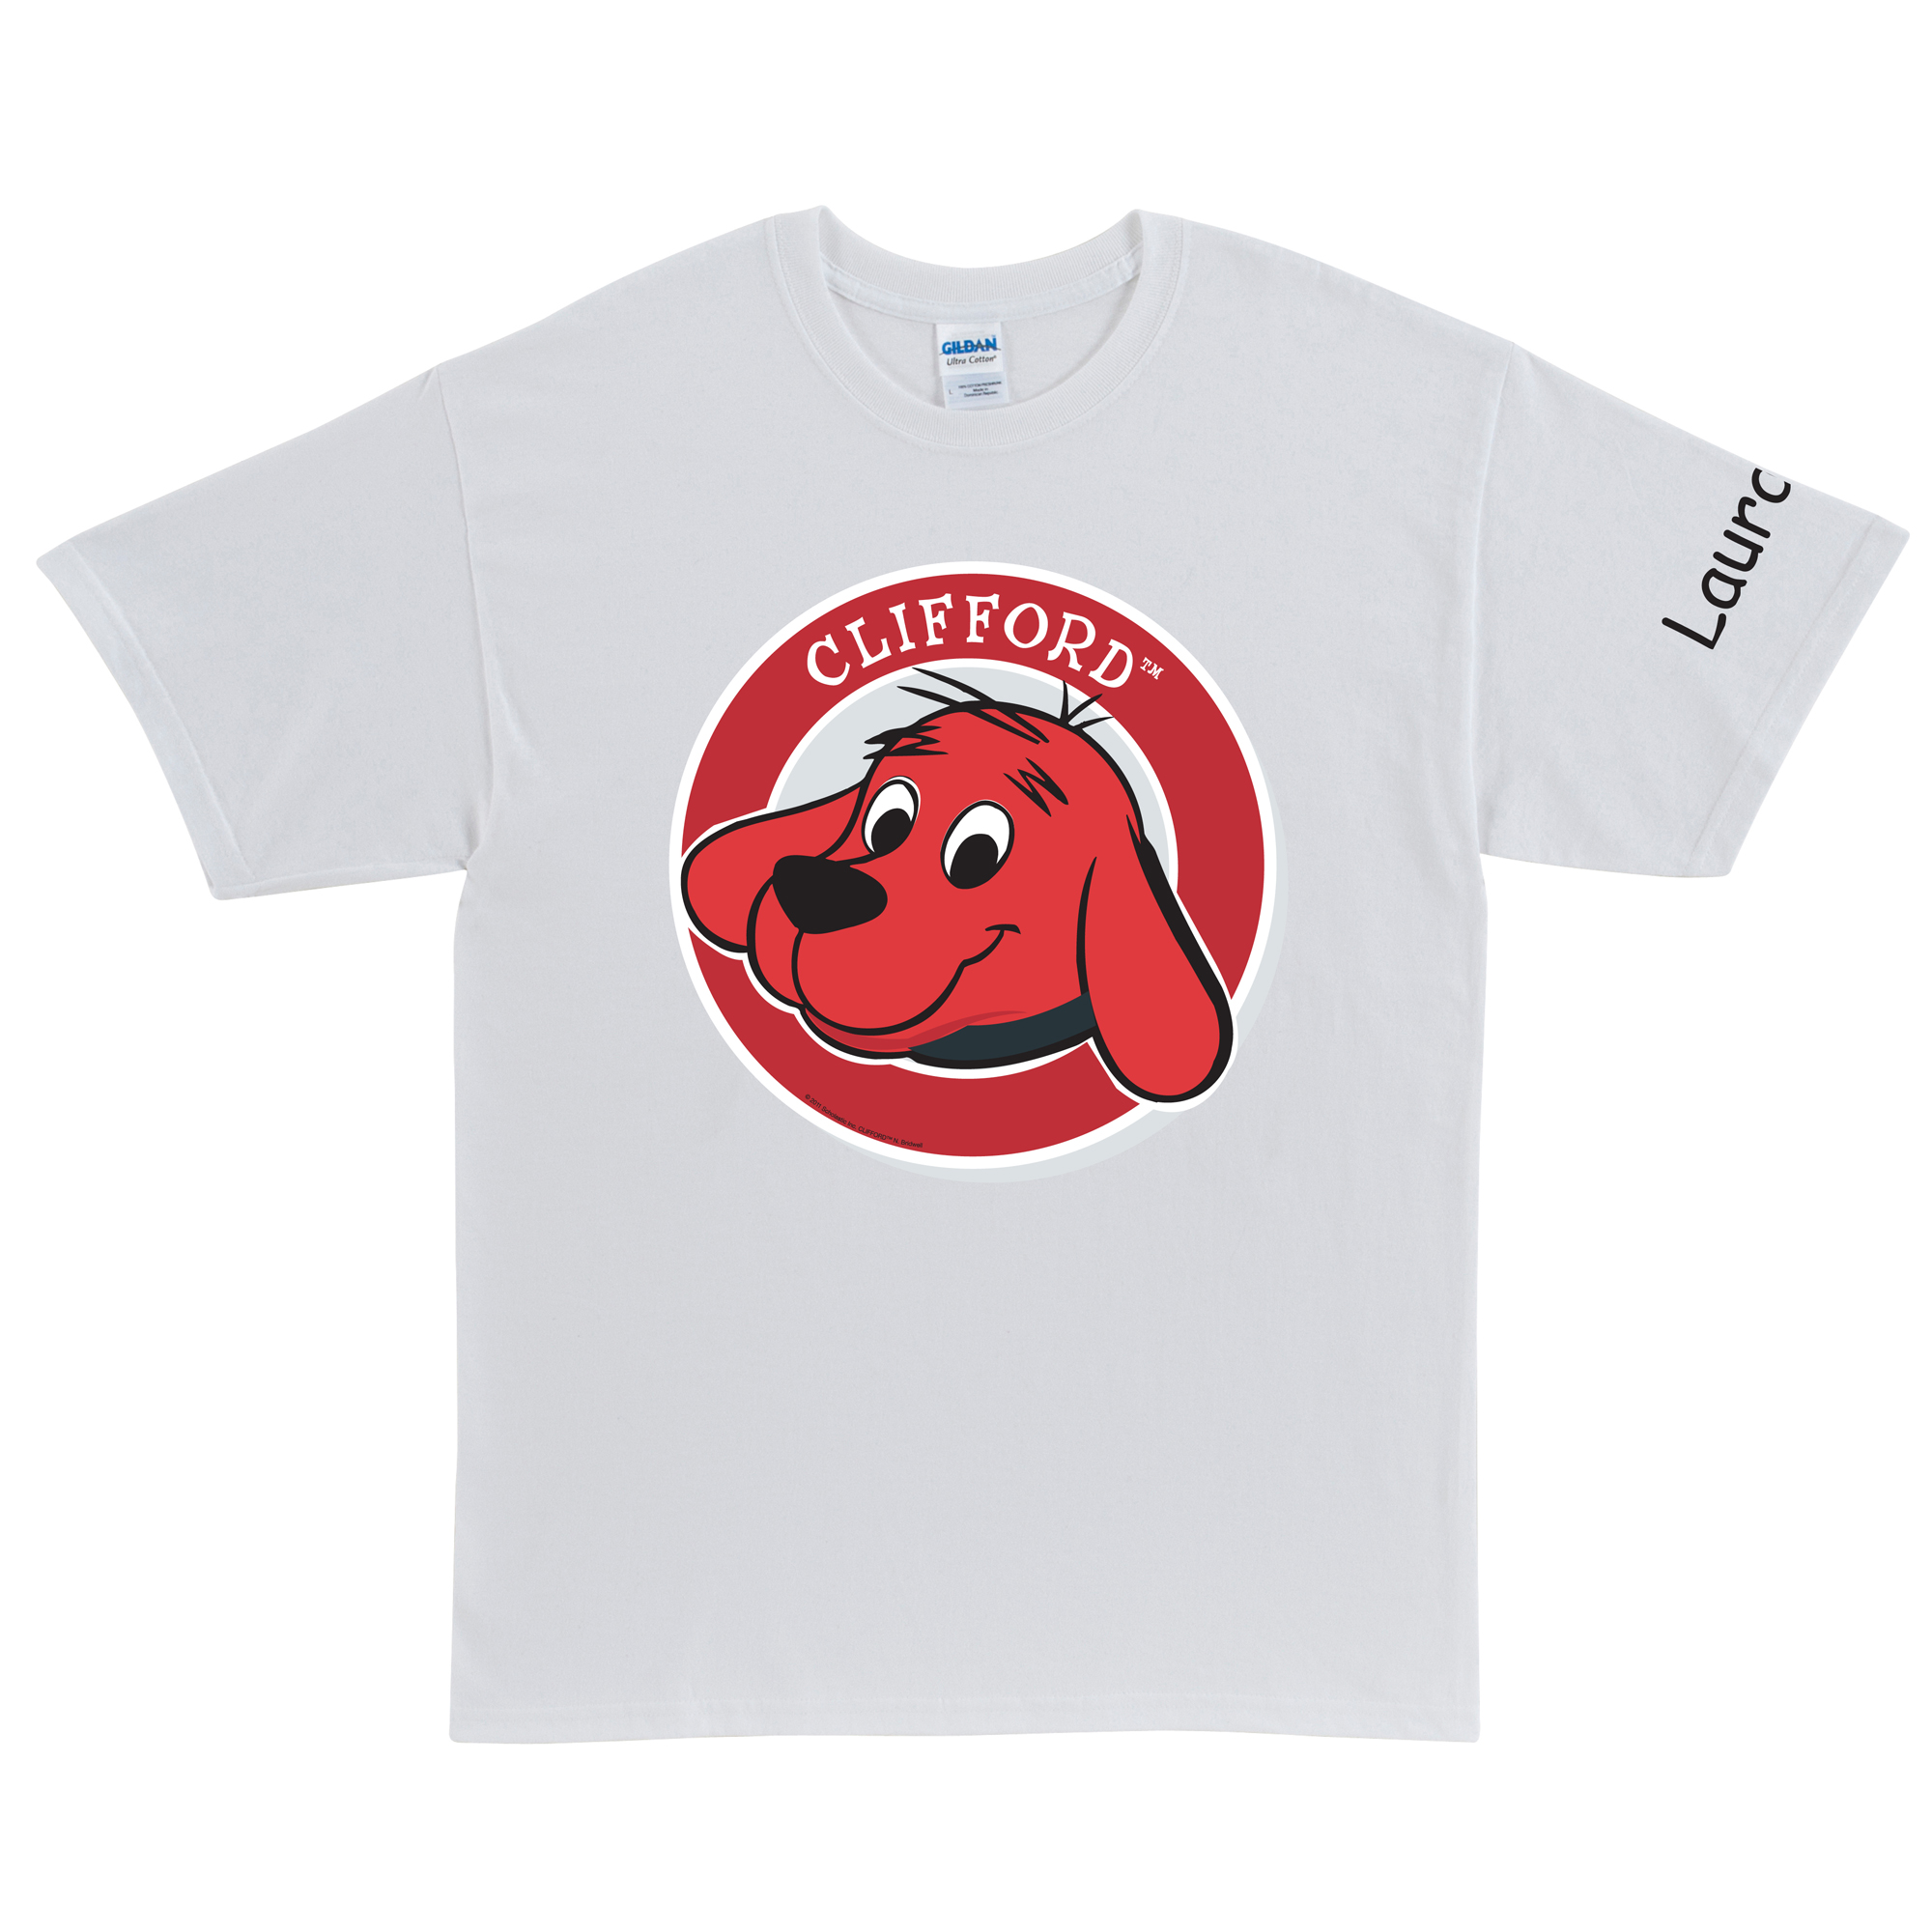 Clifford Seal White Adult T-Shirt